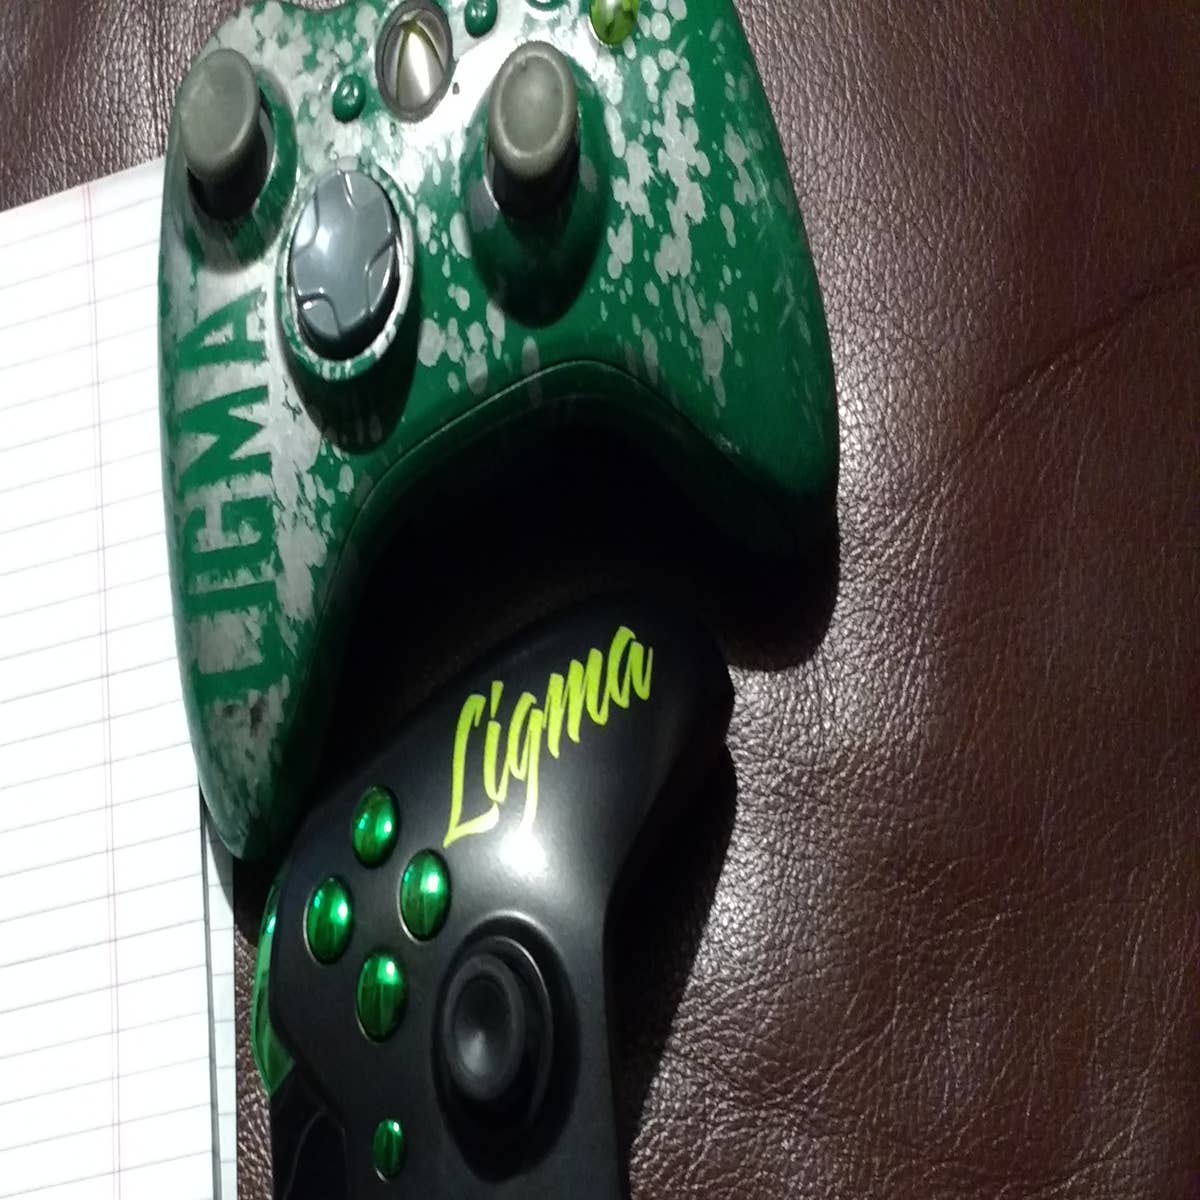 EG: Xbox fan says ligma meme destroyed his 12-year-old gamertag, Page 2